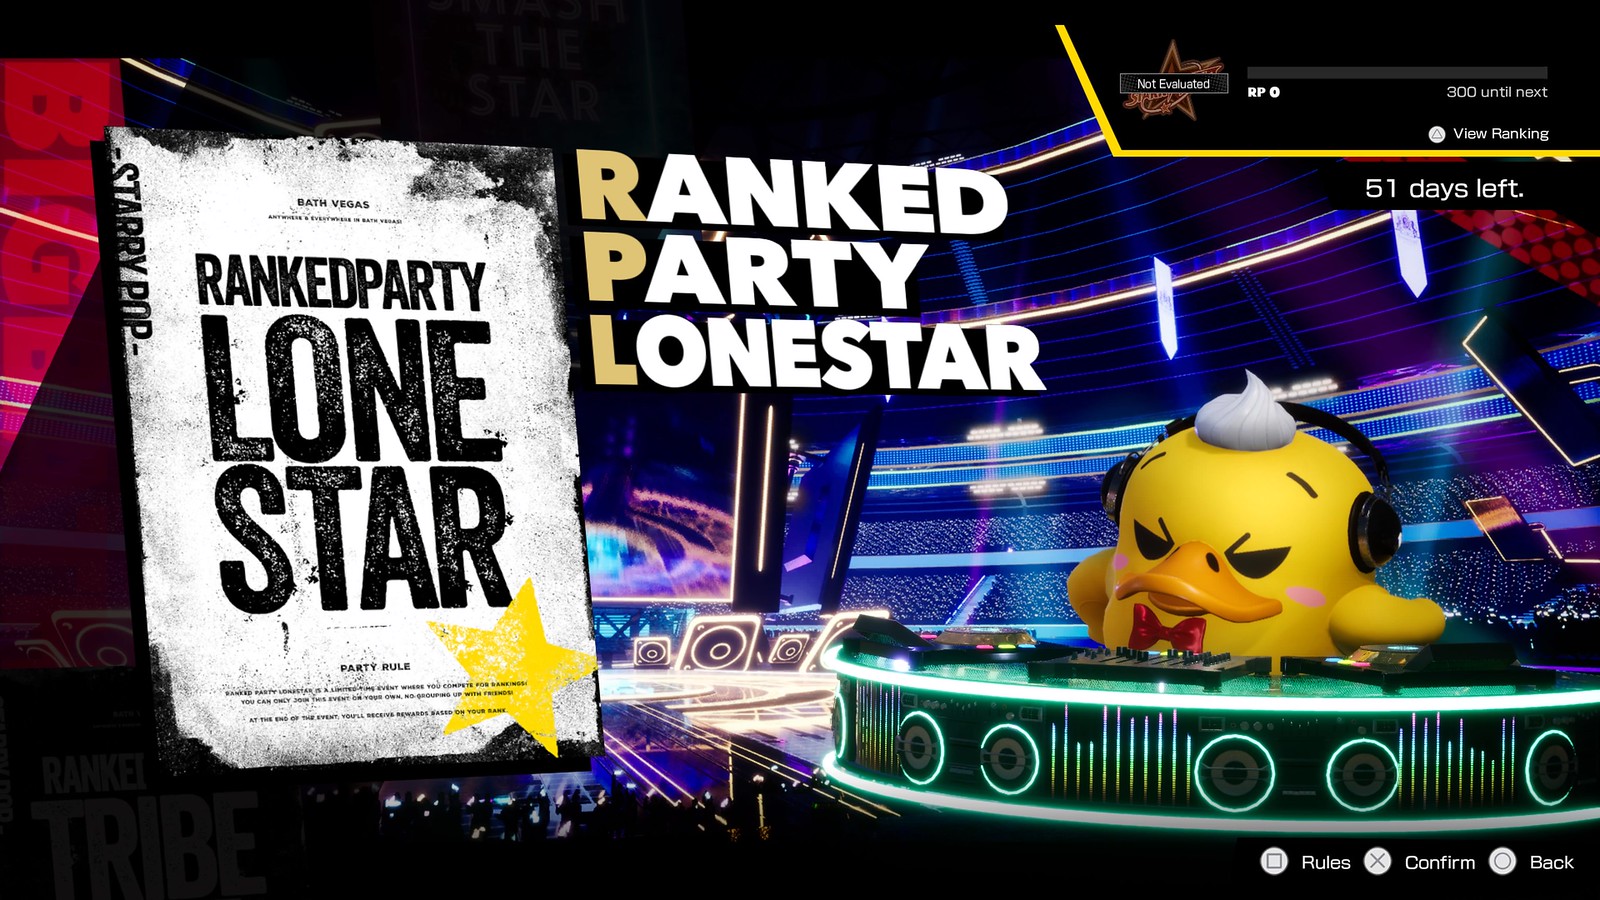 A menu screen for Ranked party Lonestar mode. That text appears on the left side of the screen. To the right sits a smart looking rubber duck behind a DJ booth. The duck is adorned with a red bow tie and headphones. Atop its head is a cute grey quiff. Above this quacksome DJ is additional info in text form: ’51 days left’, a bar labelled ‘RP’ and an option to press triangle to view your ranking.